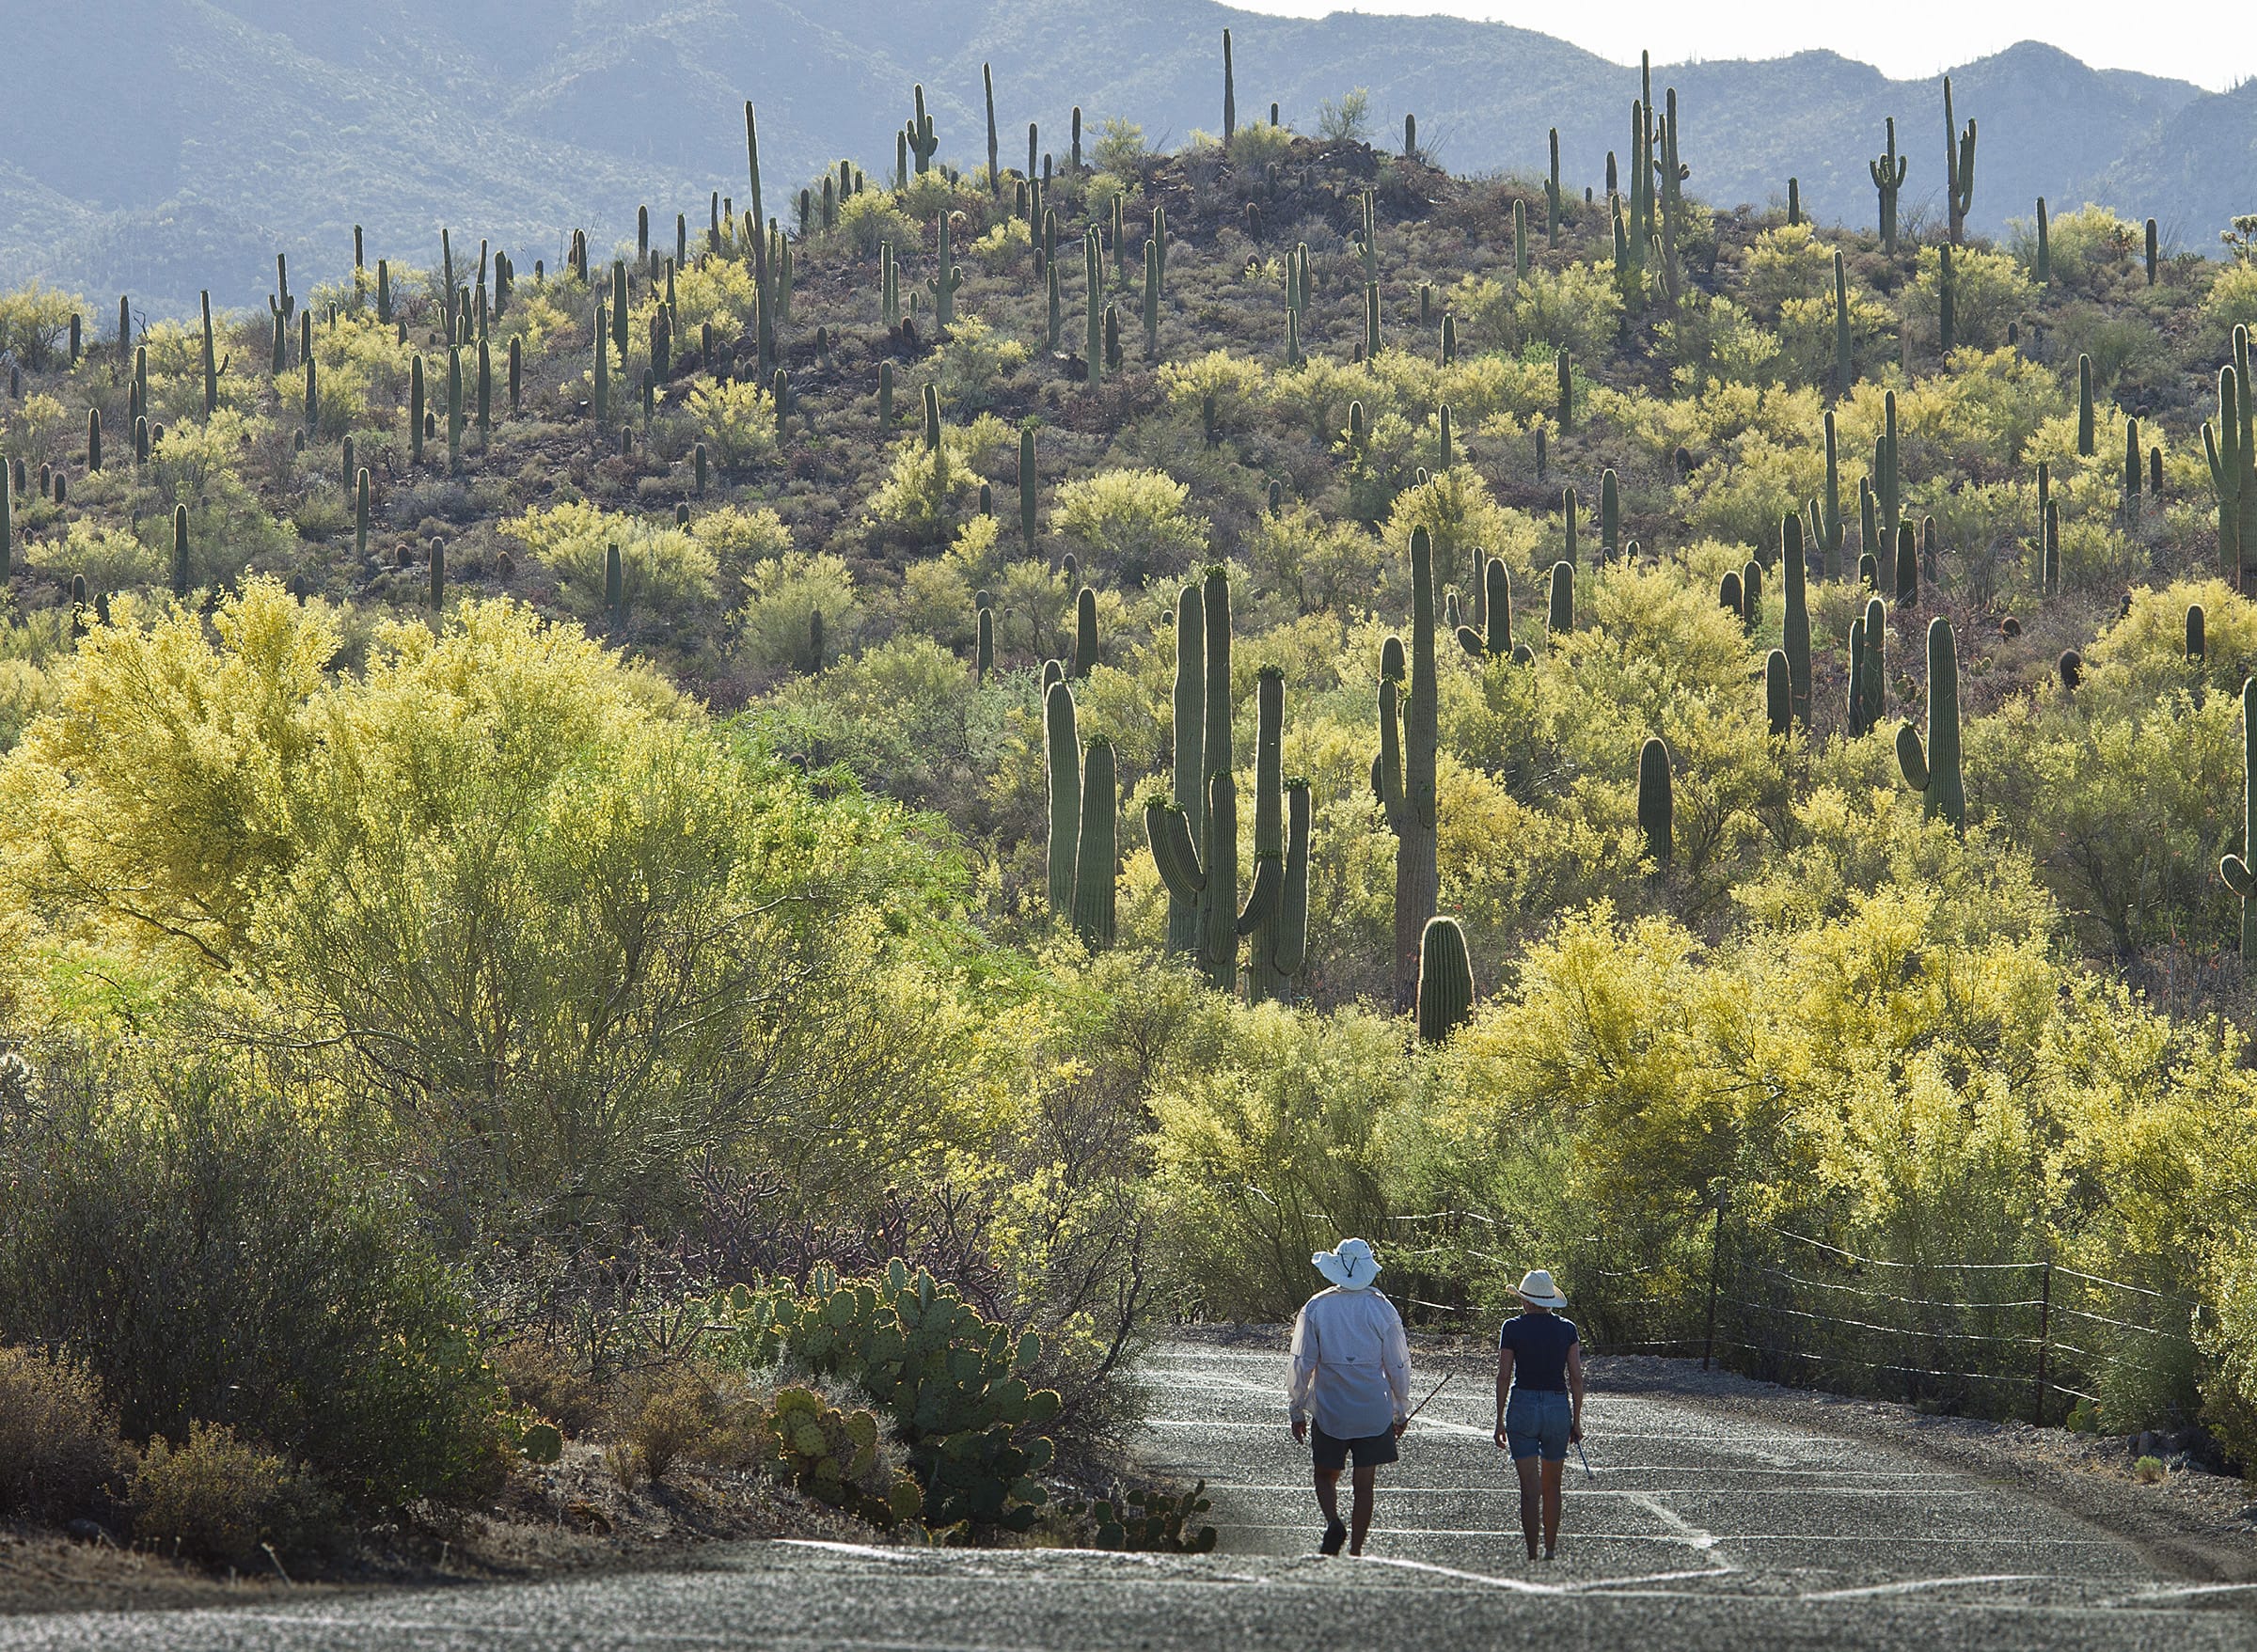 Two people walking down a road with saguaro cactus in the background.